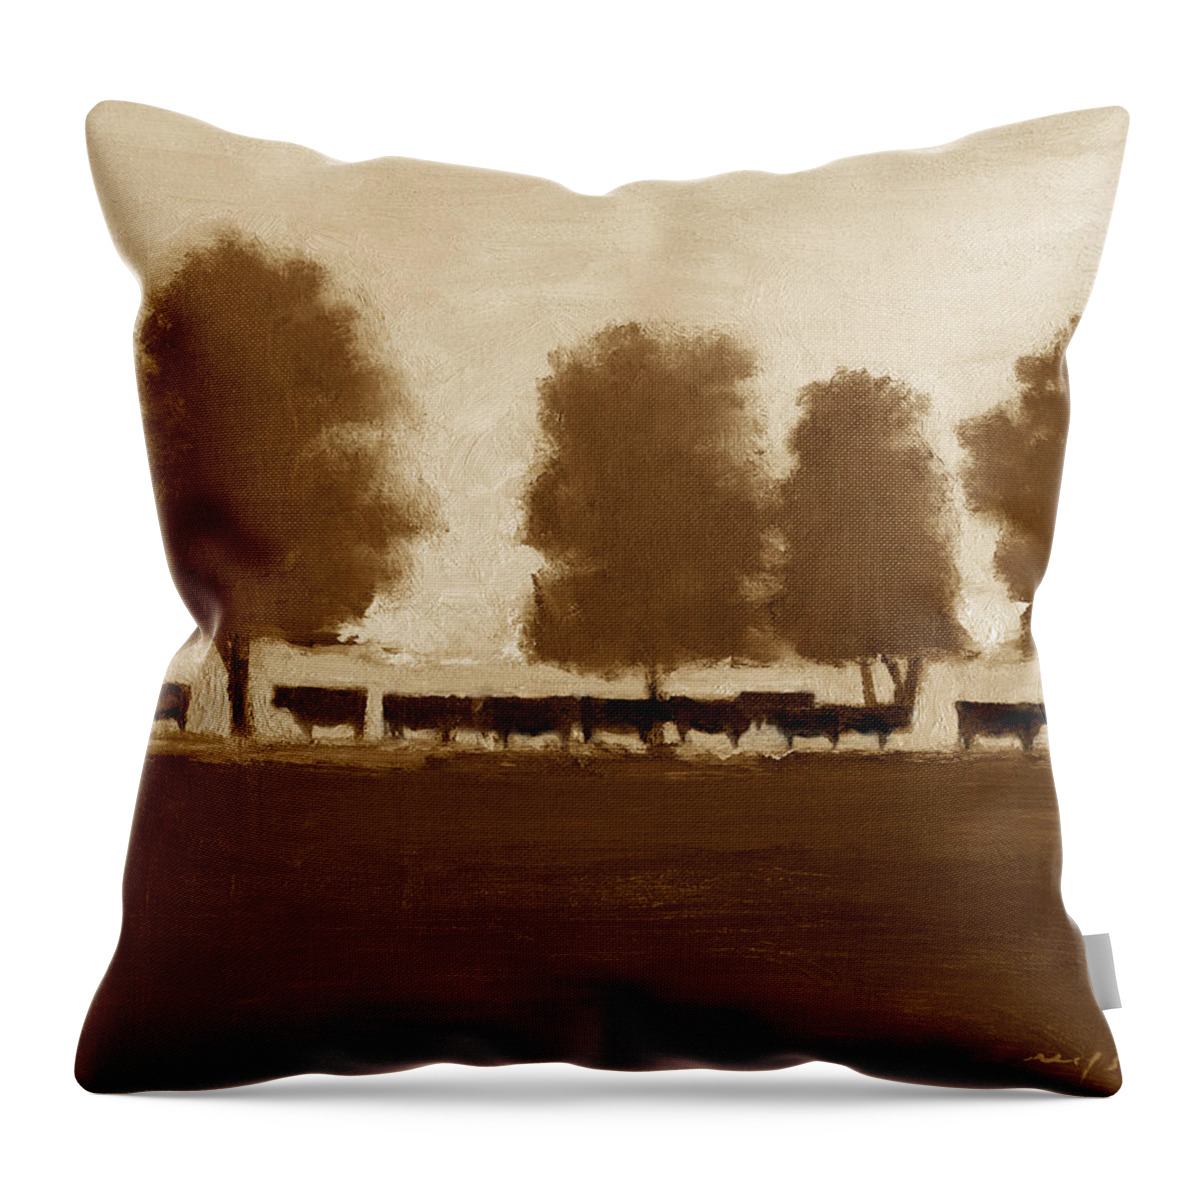 Cows Throw Pillow featuring the painting Cowherd by J Reifsnyder